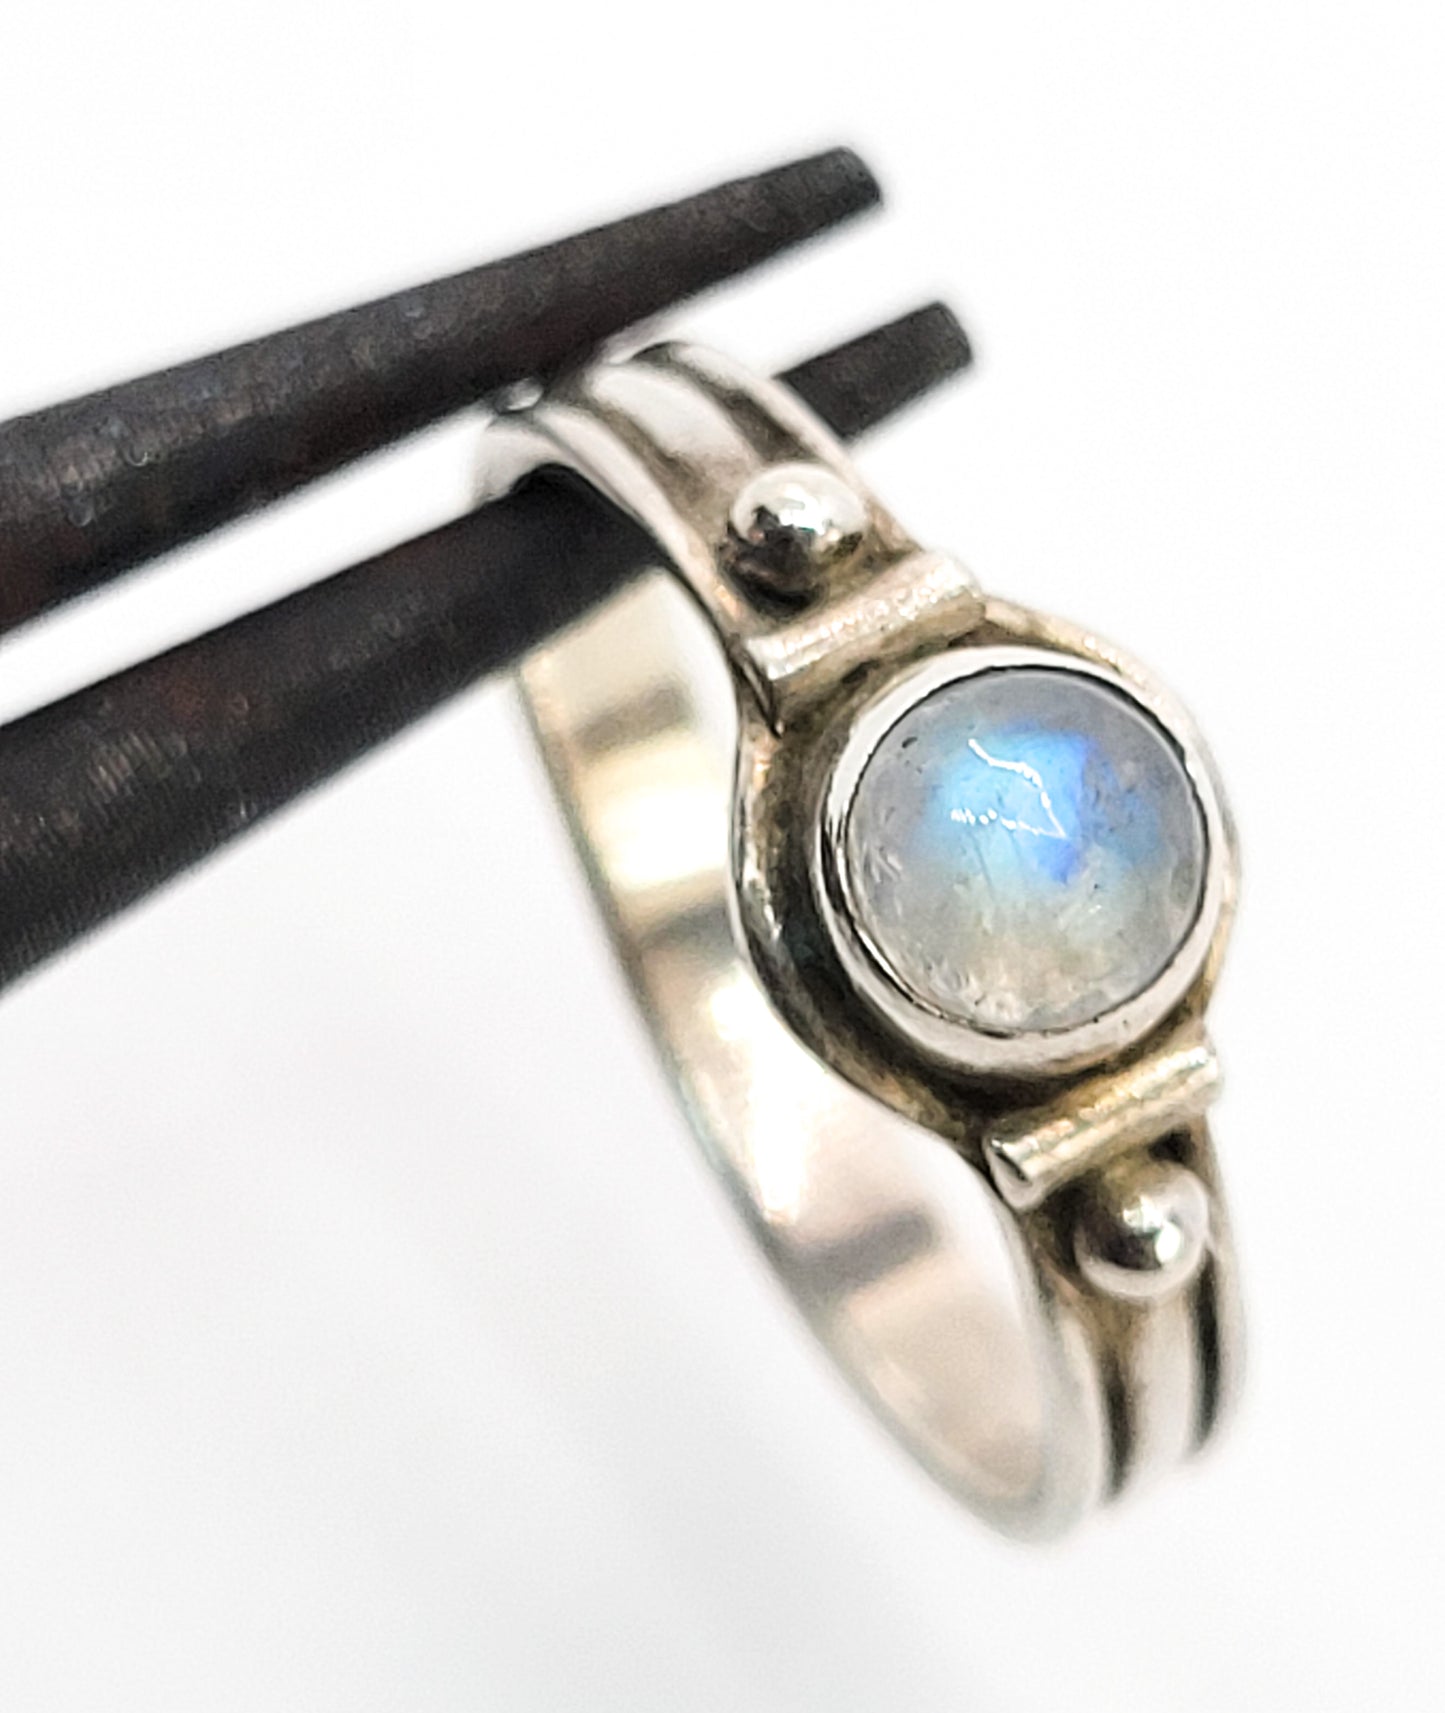 Flashy Blue Moonstone tribal balinese style sterling silver ring size 6